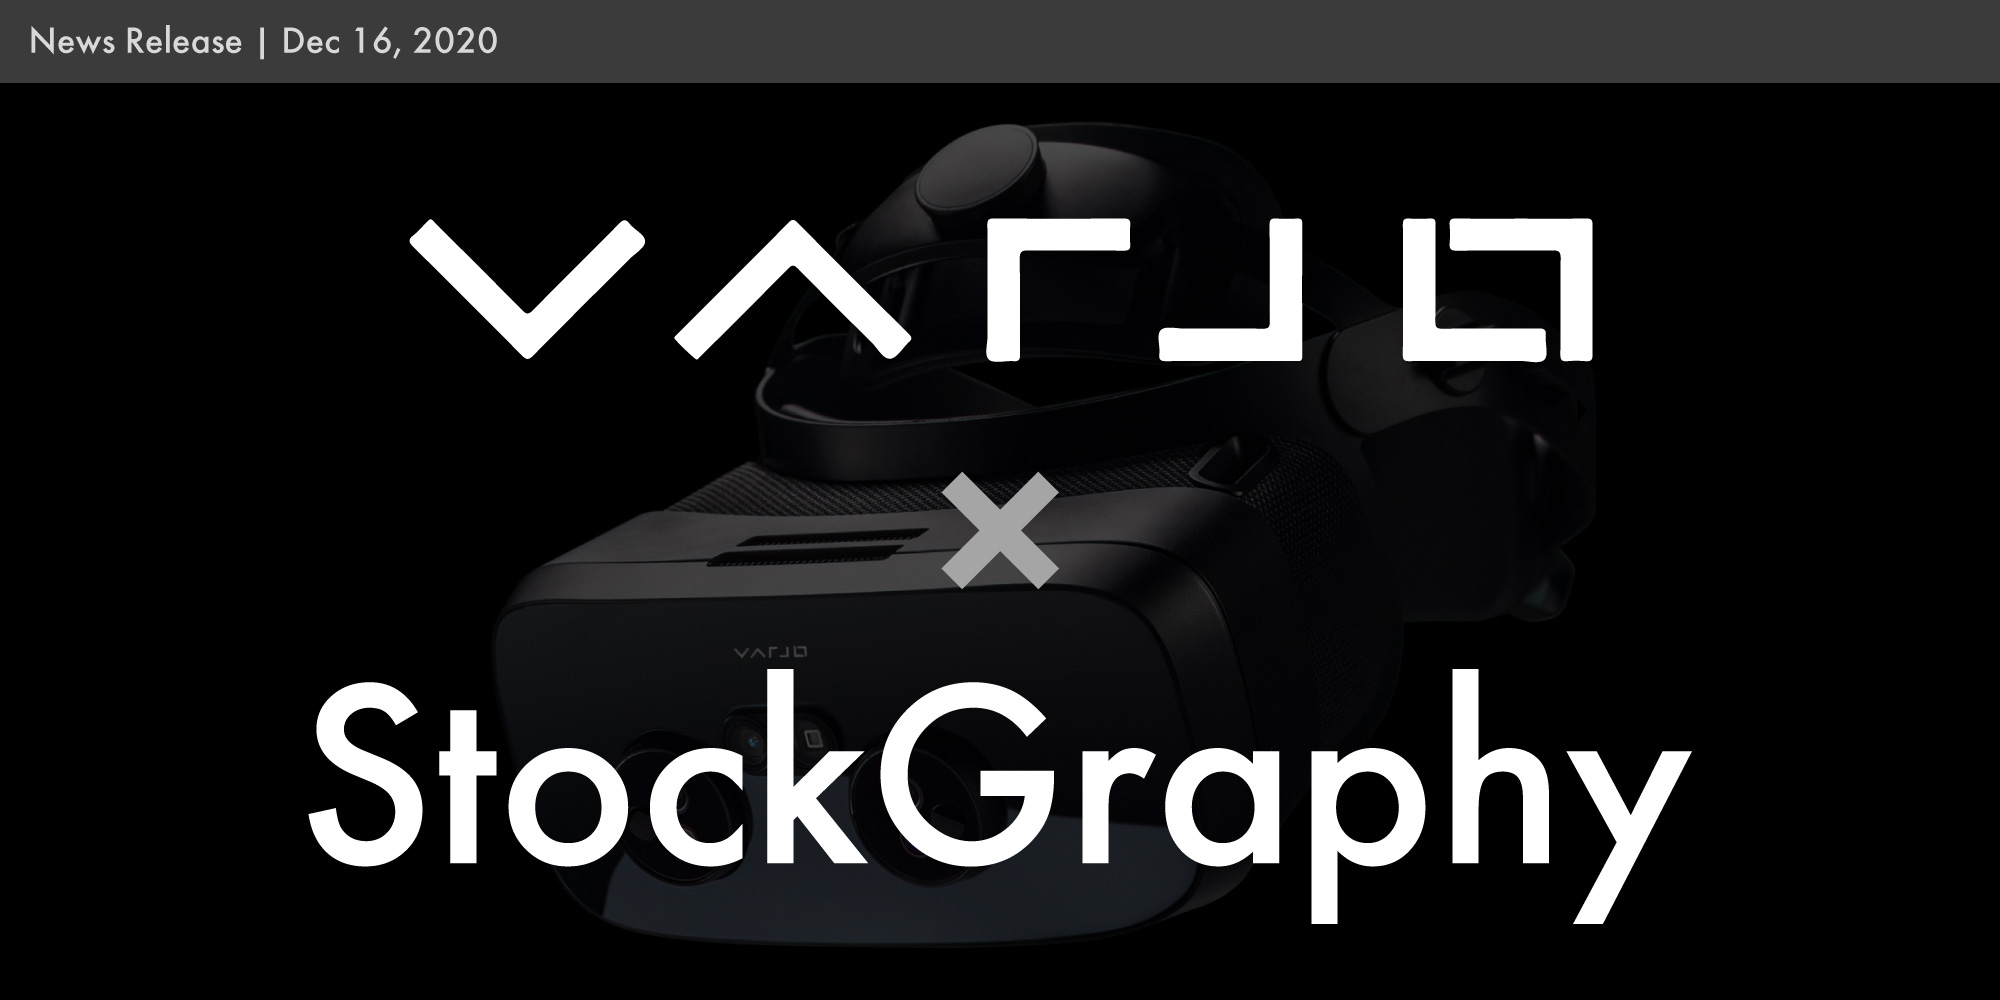 Partnership between Varjo and StockGraphy